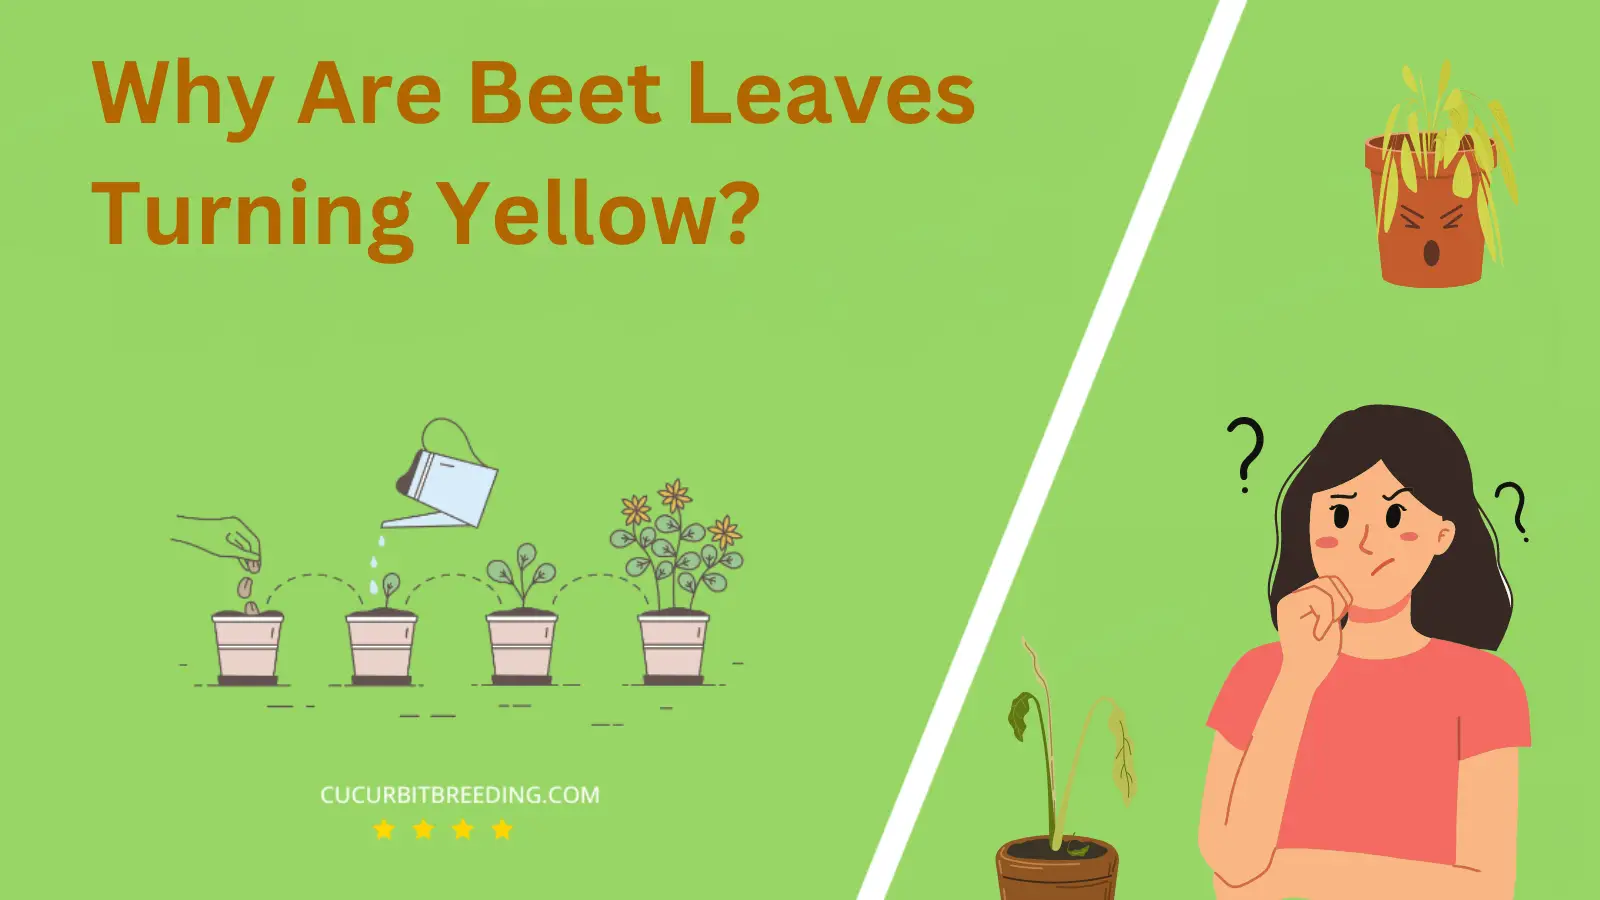 Why Are Beet Leaves Turning Yellow